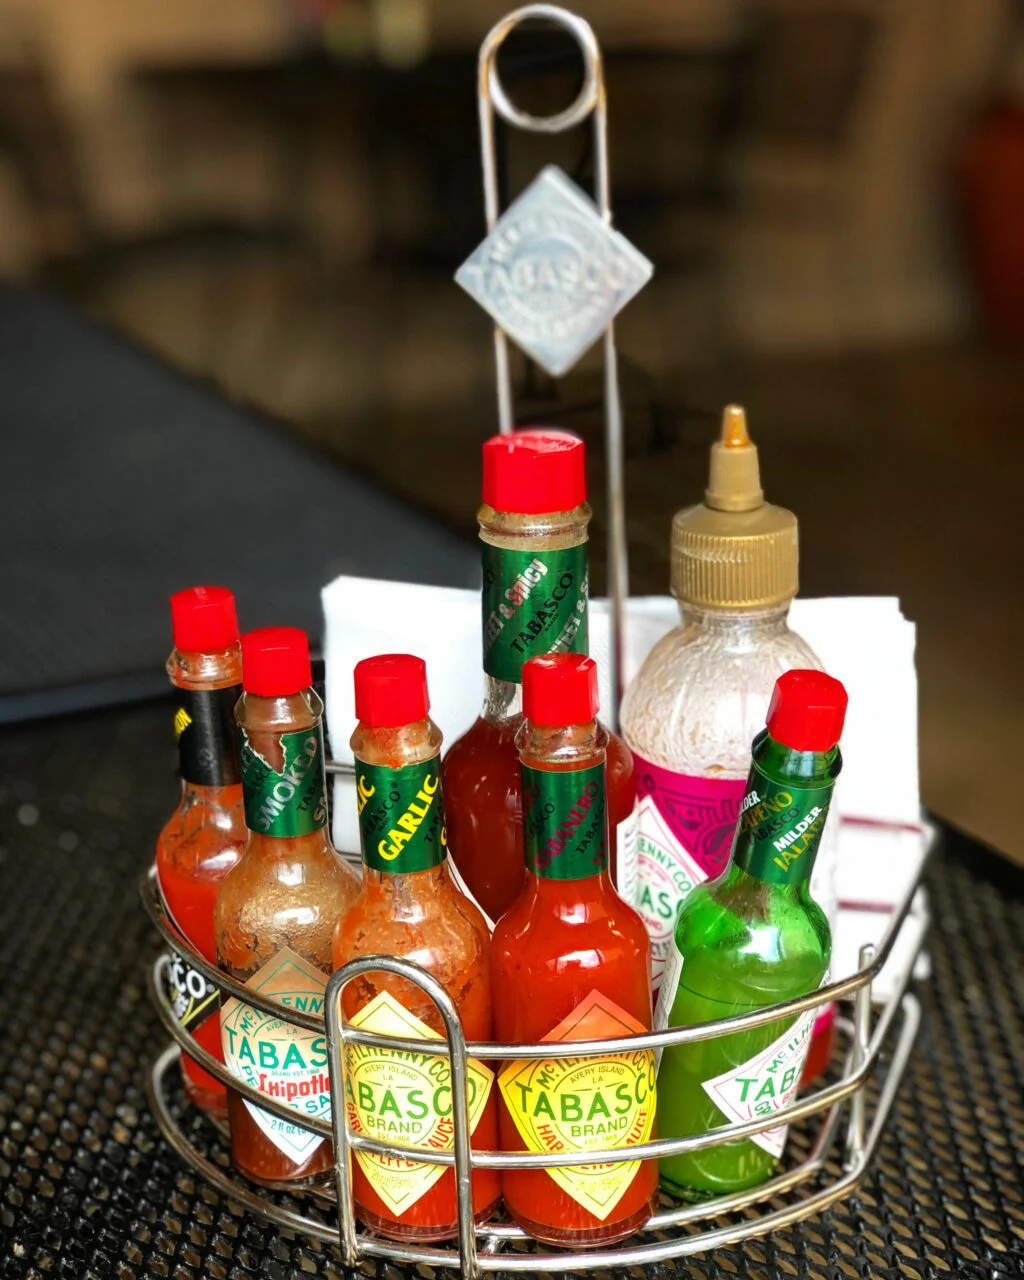 Bottles of the seven Tabasco Sauce flavors in a convenient metal caddy.